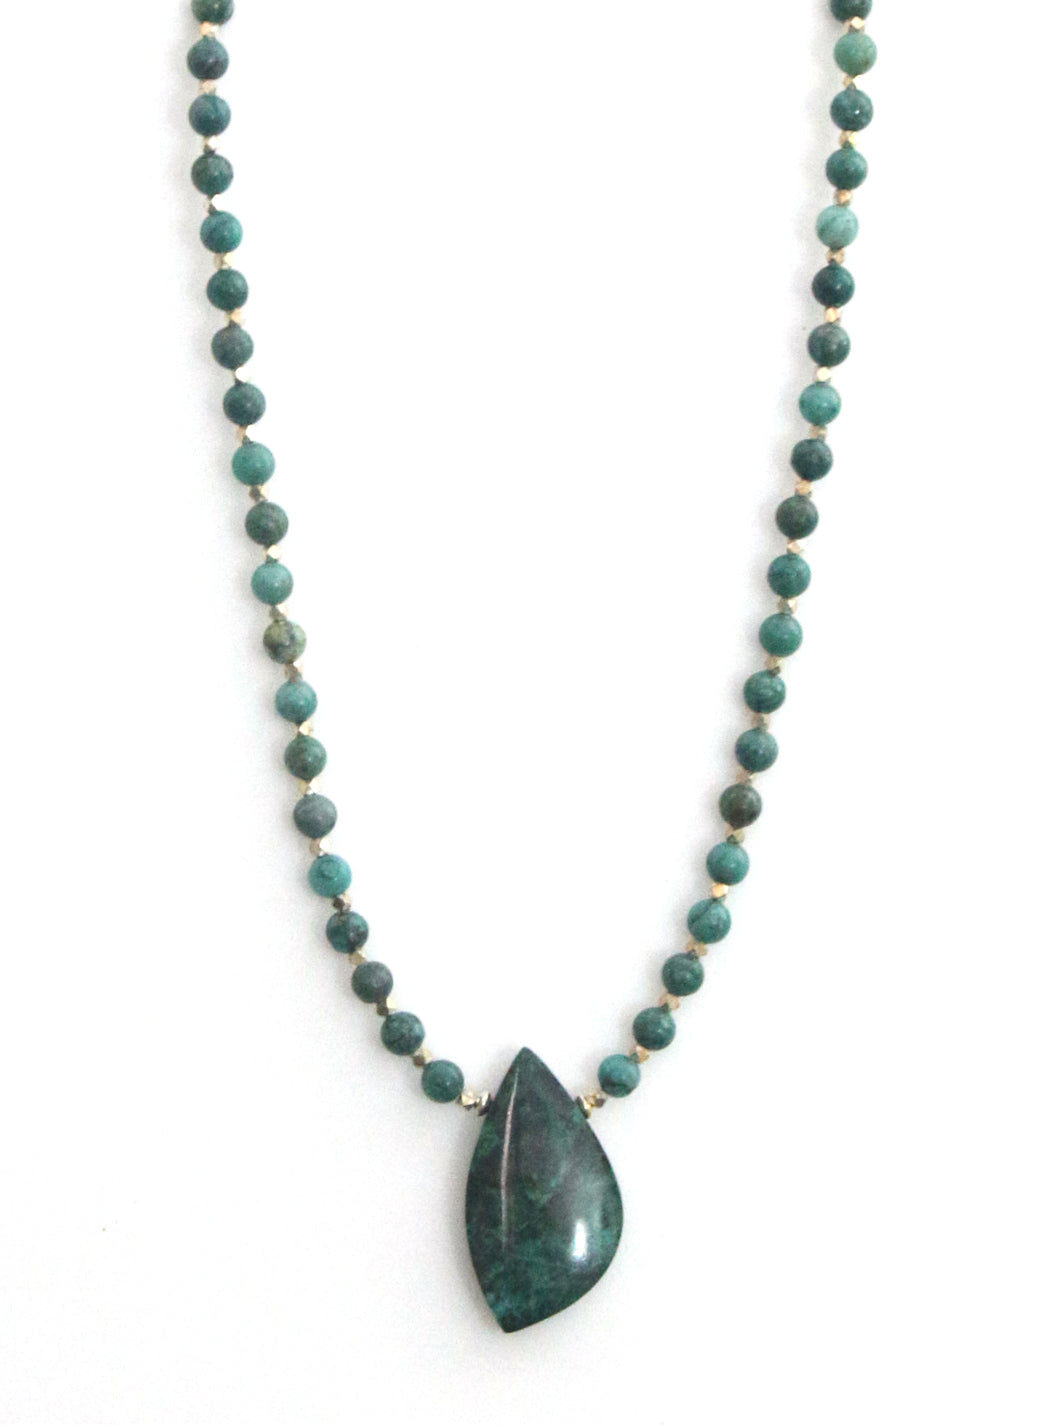 Australian Handmade Turquoise Colour Necklace with Chrysocolla Pendant and Beads and Sterling Silver